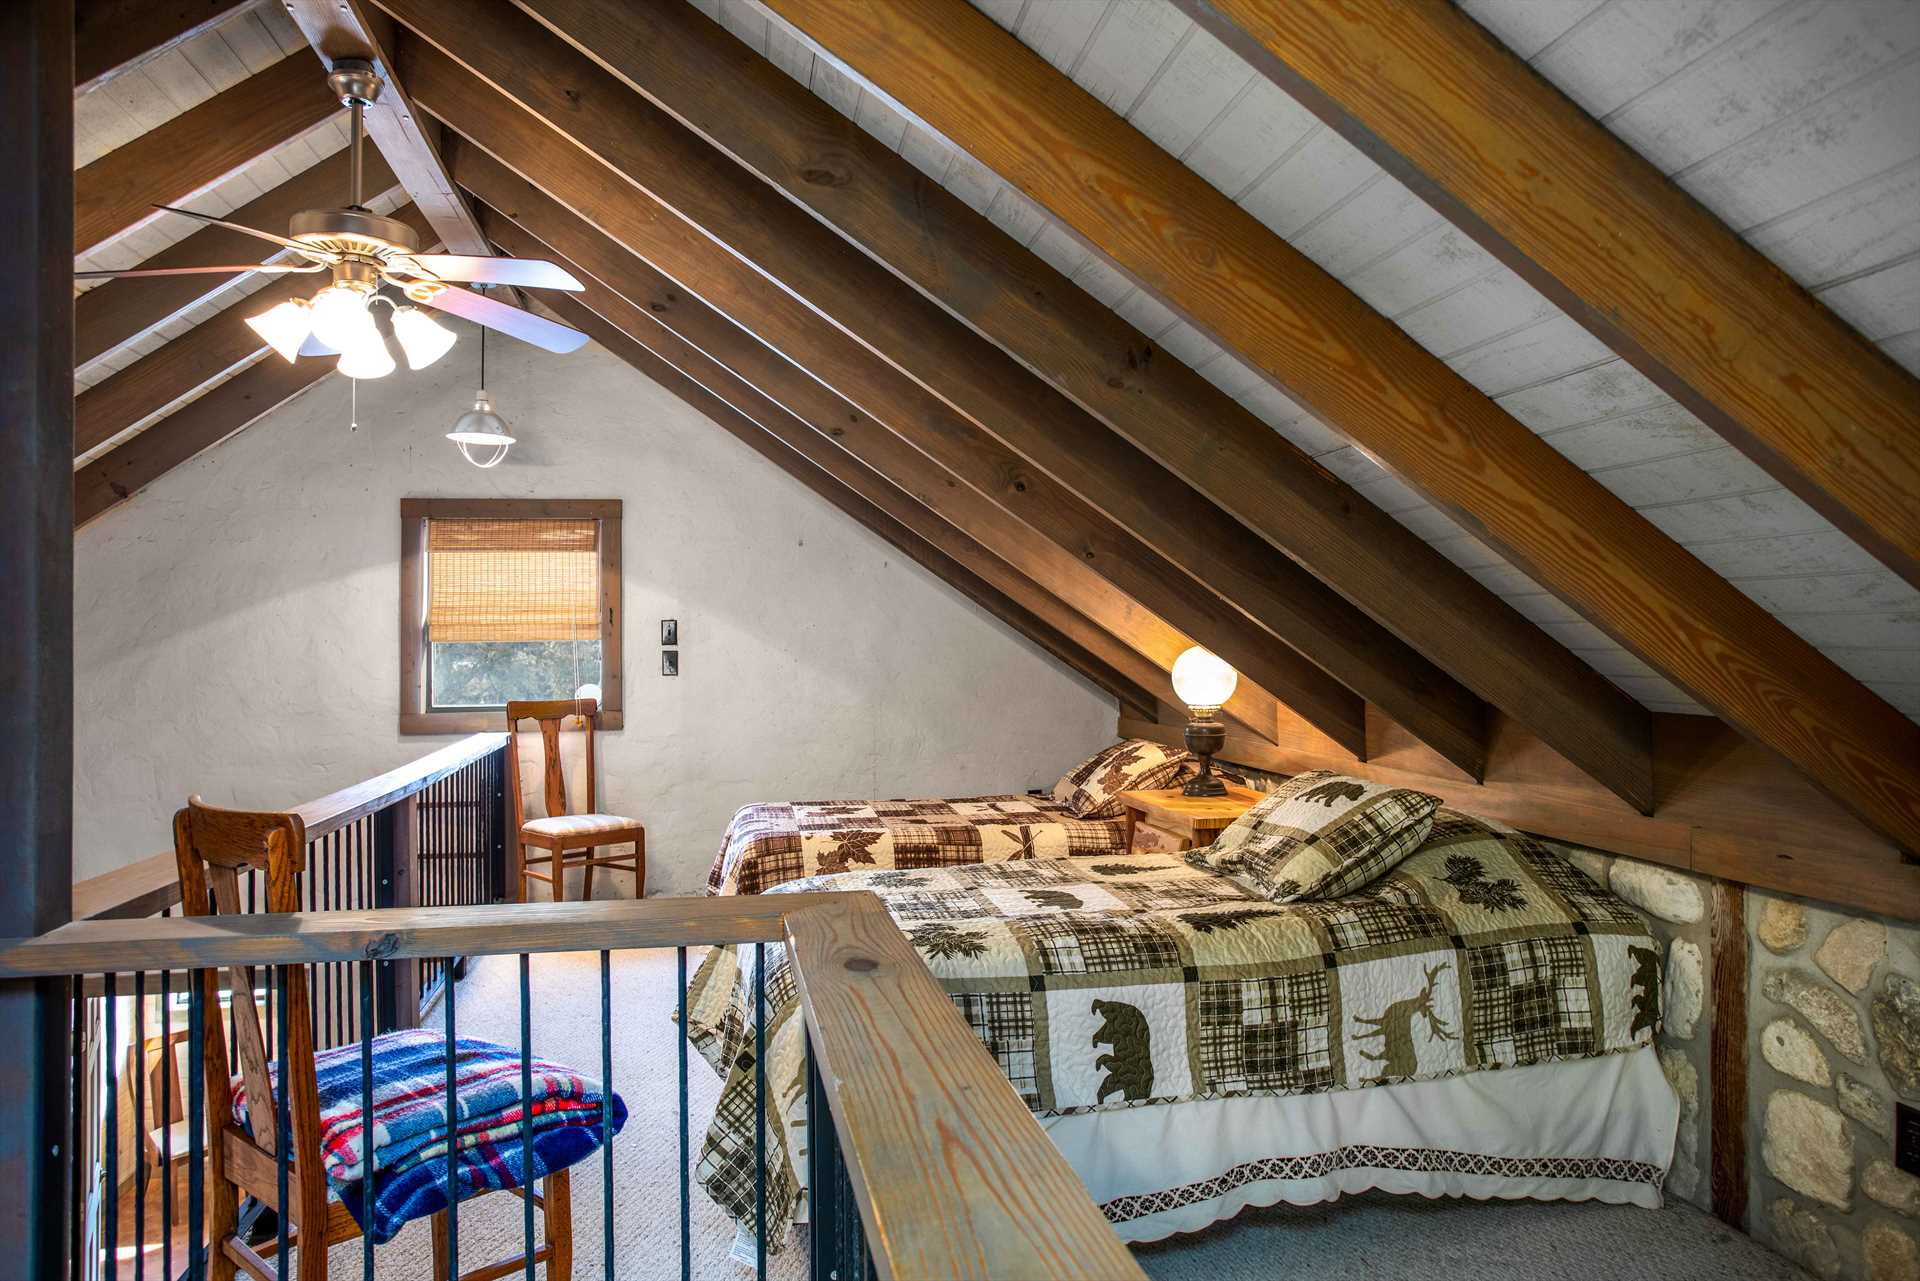                                                 Rounding out the loft are two comfortable twin beds. All told, the Medina Mountain Retreat has sleeping accommodations for up to eight!